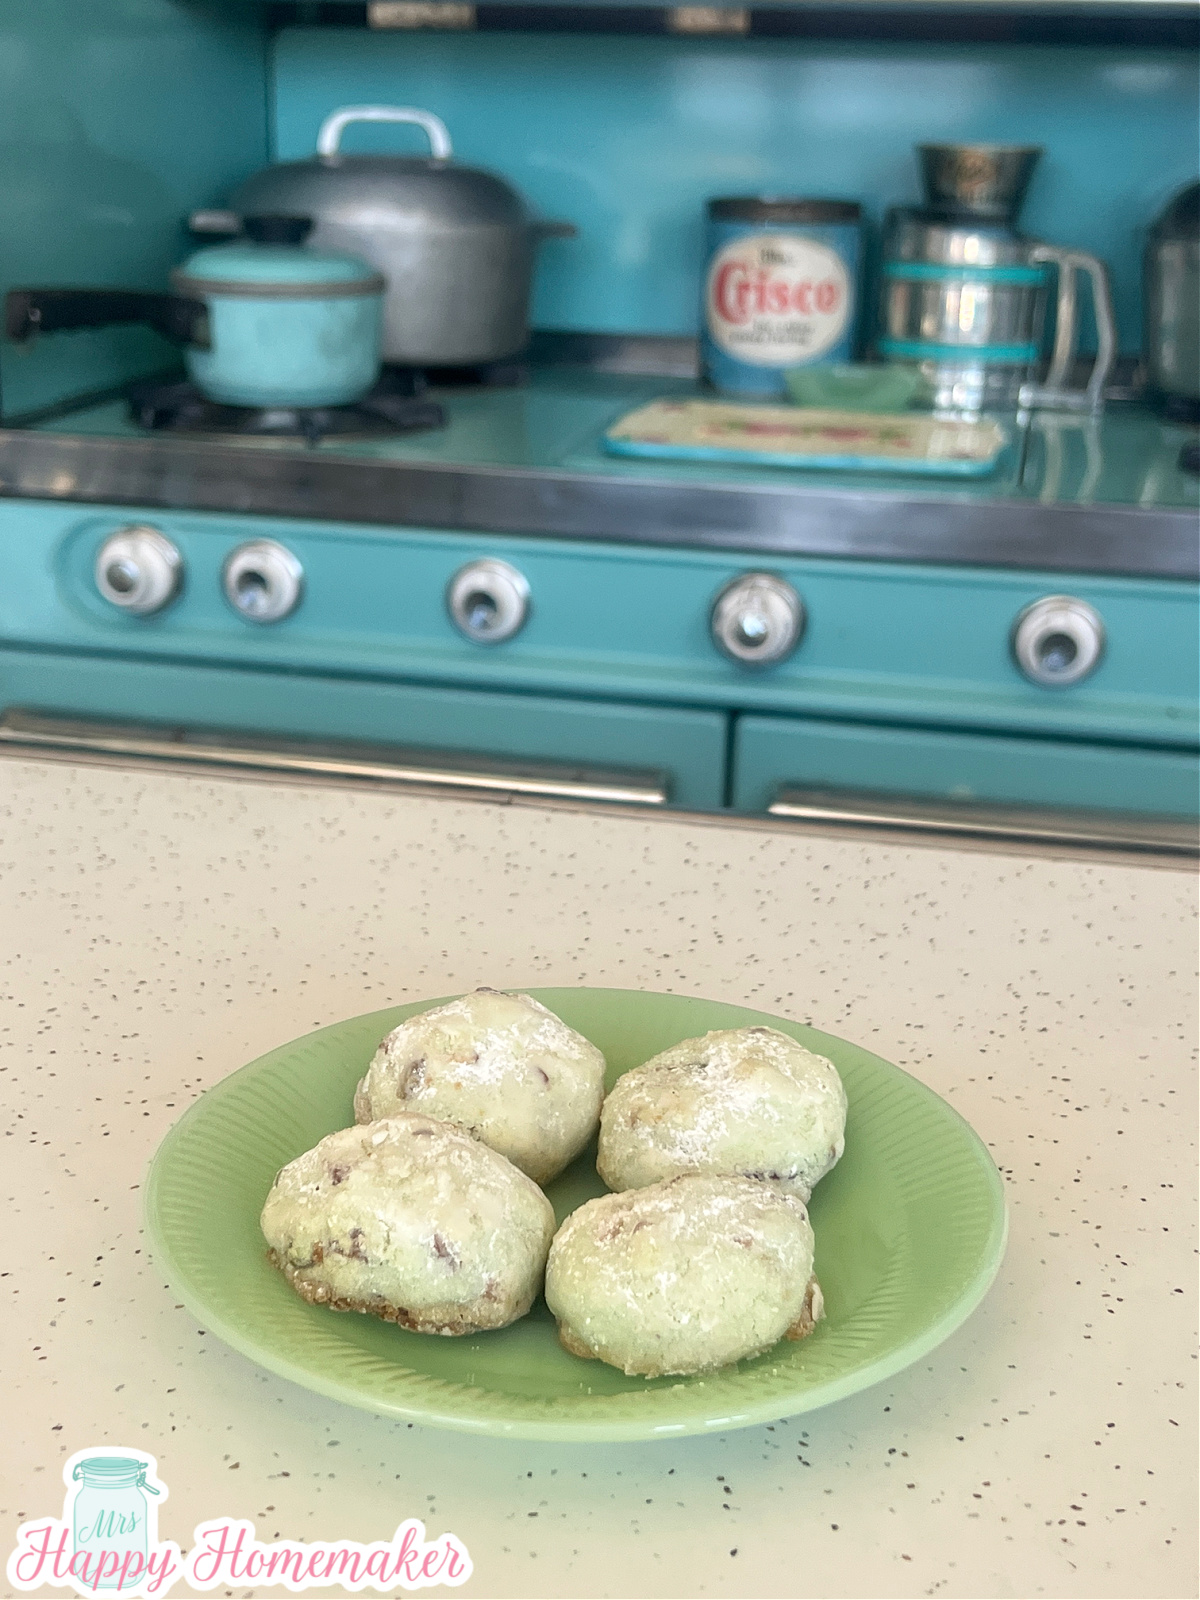 Pistachio Wedding Cookies on a jadeite plate on a white countertop infront of a vintage blue stove